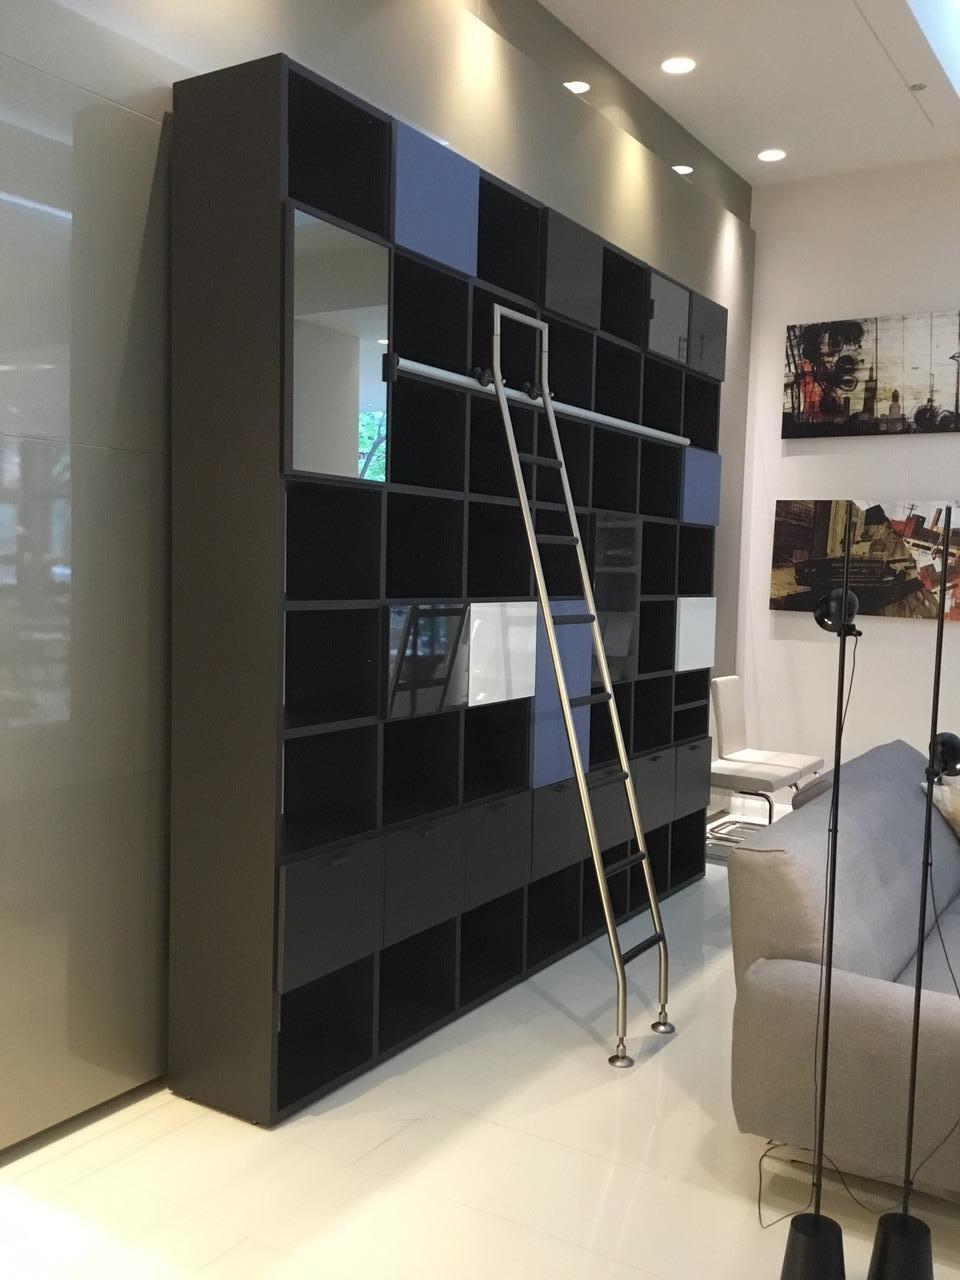 Designed by Antonia Citterio for Tisettanta

Contemporary bookcase with shelves in matt dark grey lacquer with a mix of drawers and hinged door fronts in matt and glossy white and blue lacquer and mirror finish. 

Bookcase includes 7 drawers, 13